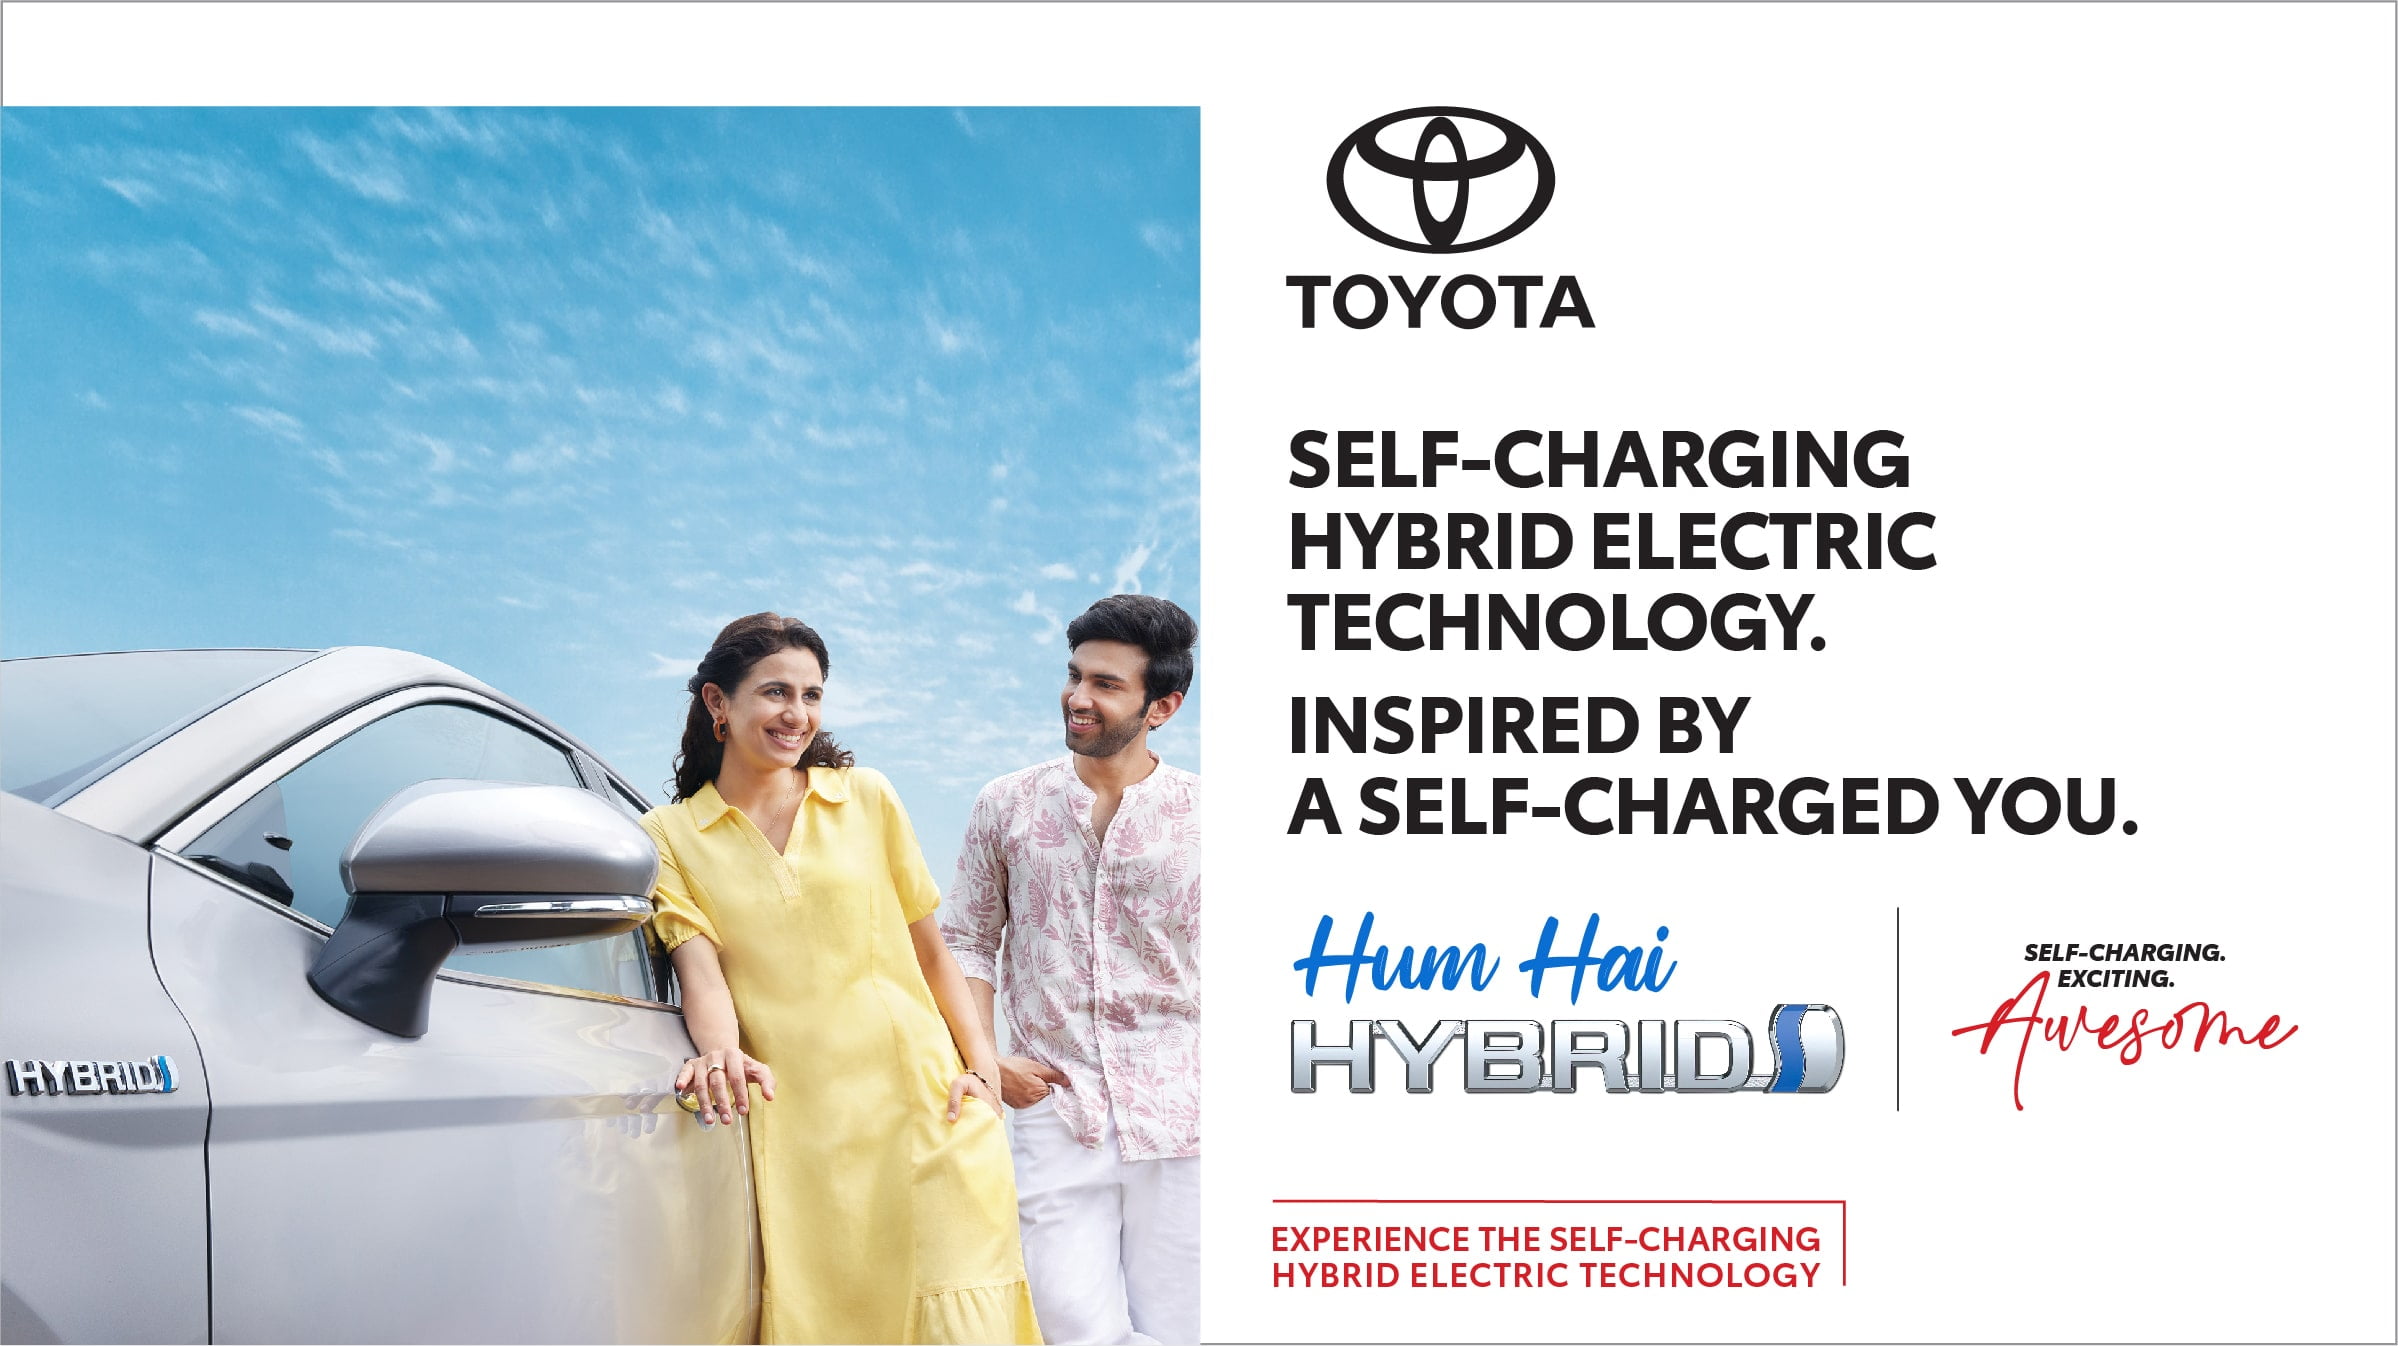 TKM Launches ‘Hum Hai Hybrid’ Campaign on Self-Charging Hybrid Electric Vehicle Technology1